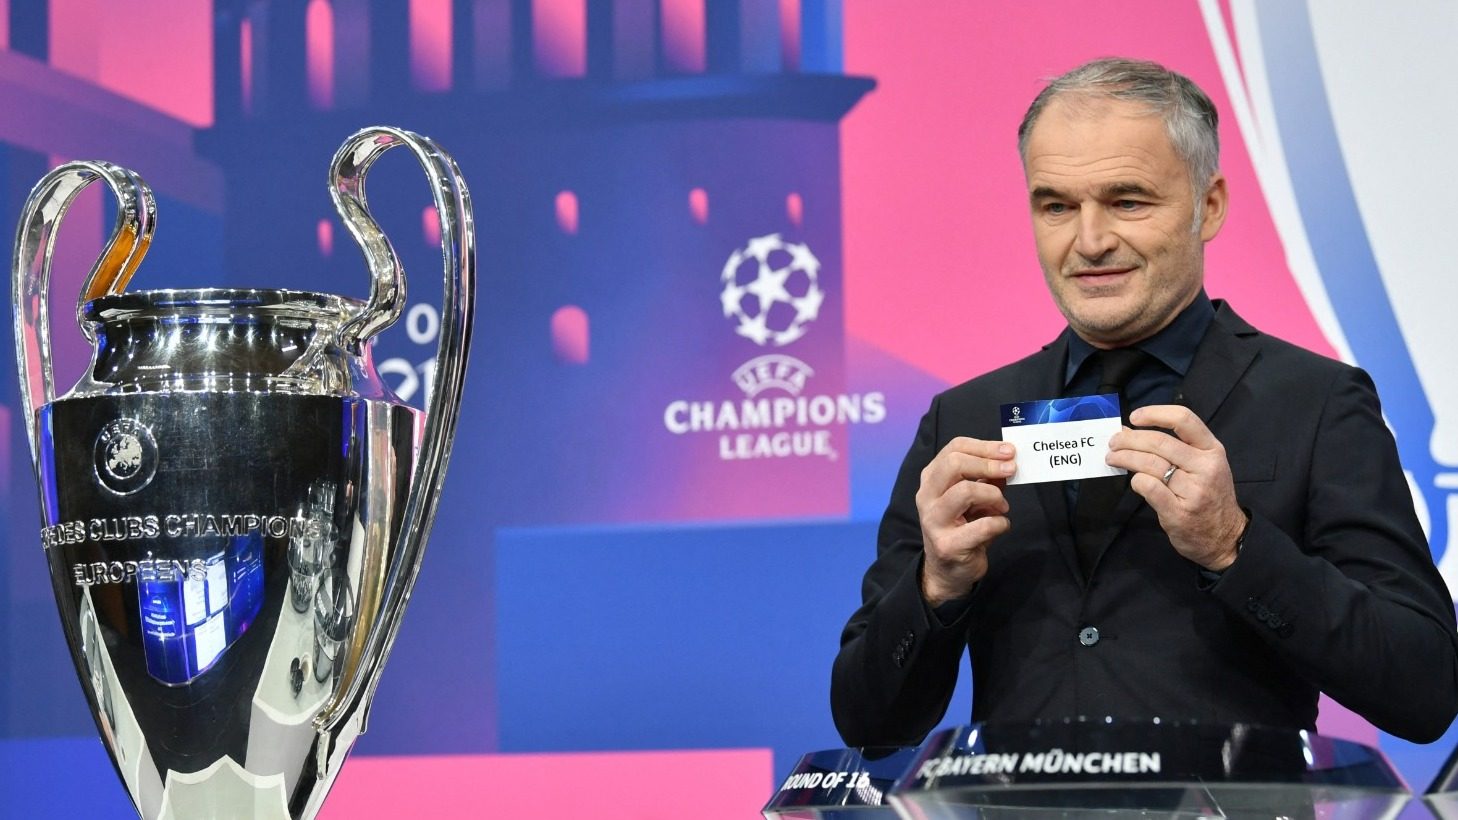 Mechanics Jeg var overrasket Korrekt UEFA Champions League 2021-22 round of 16 draw: Get teams, telecast and  watch live streaming in India